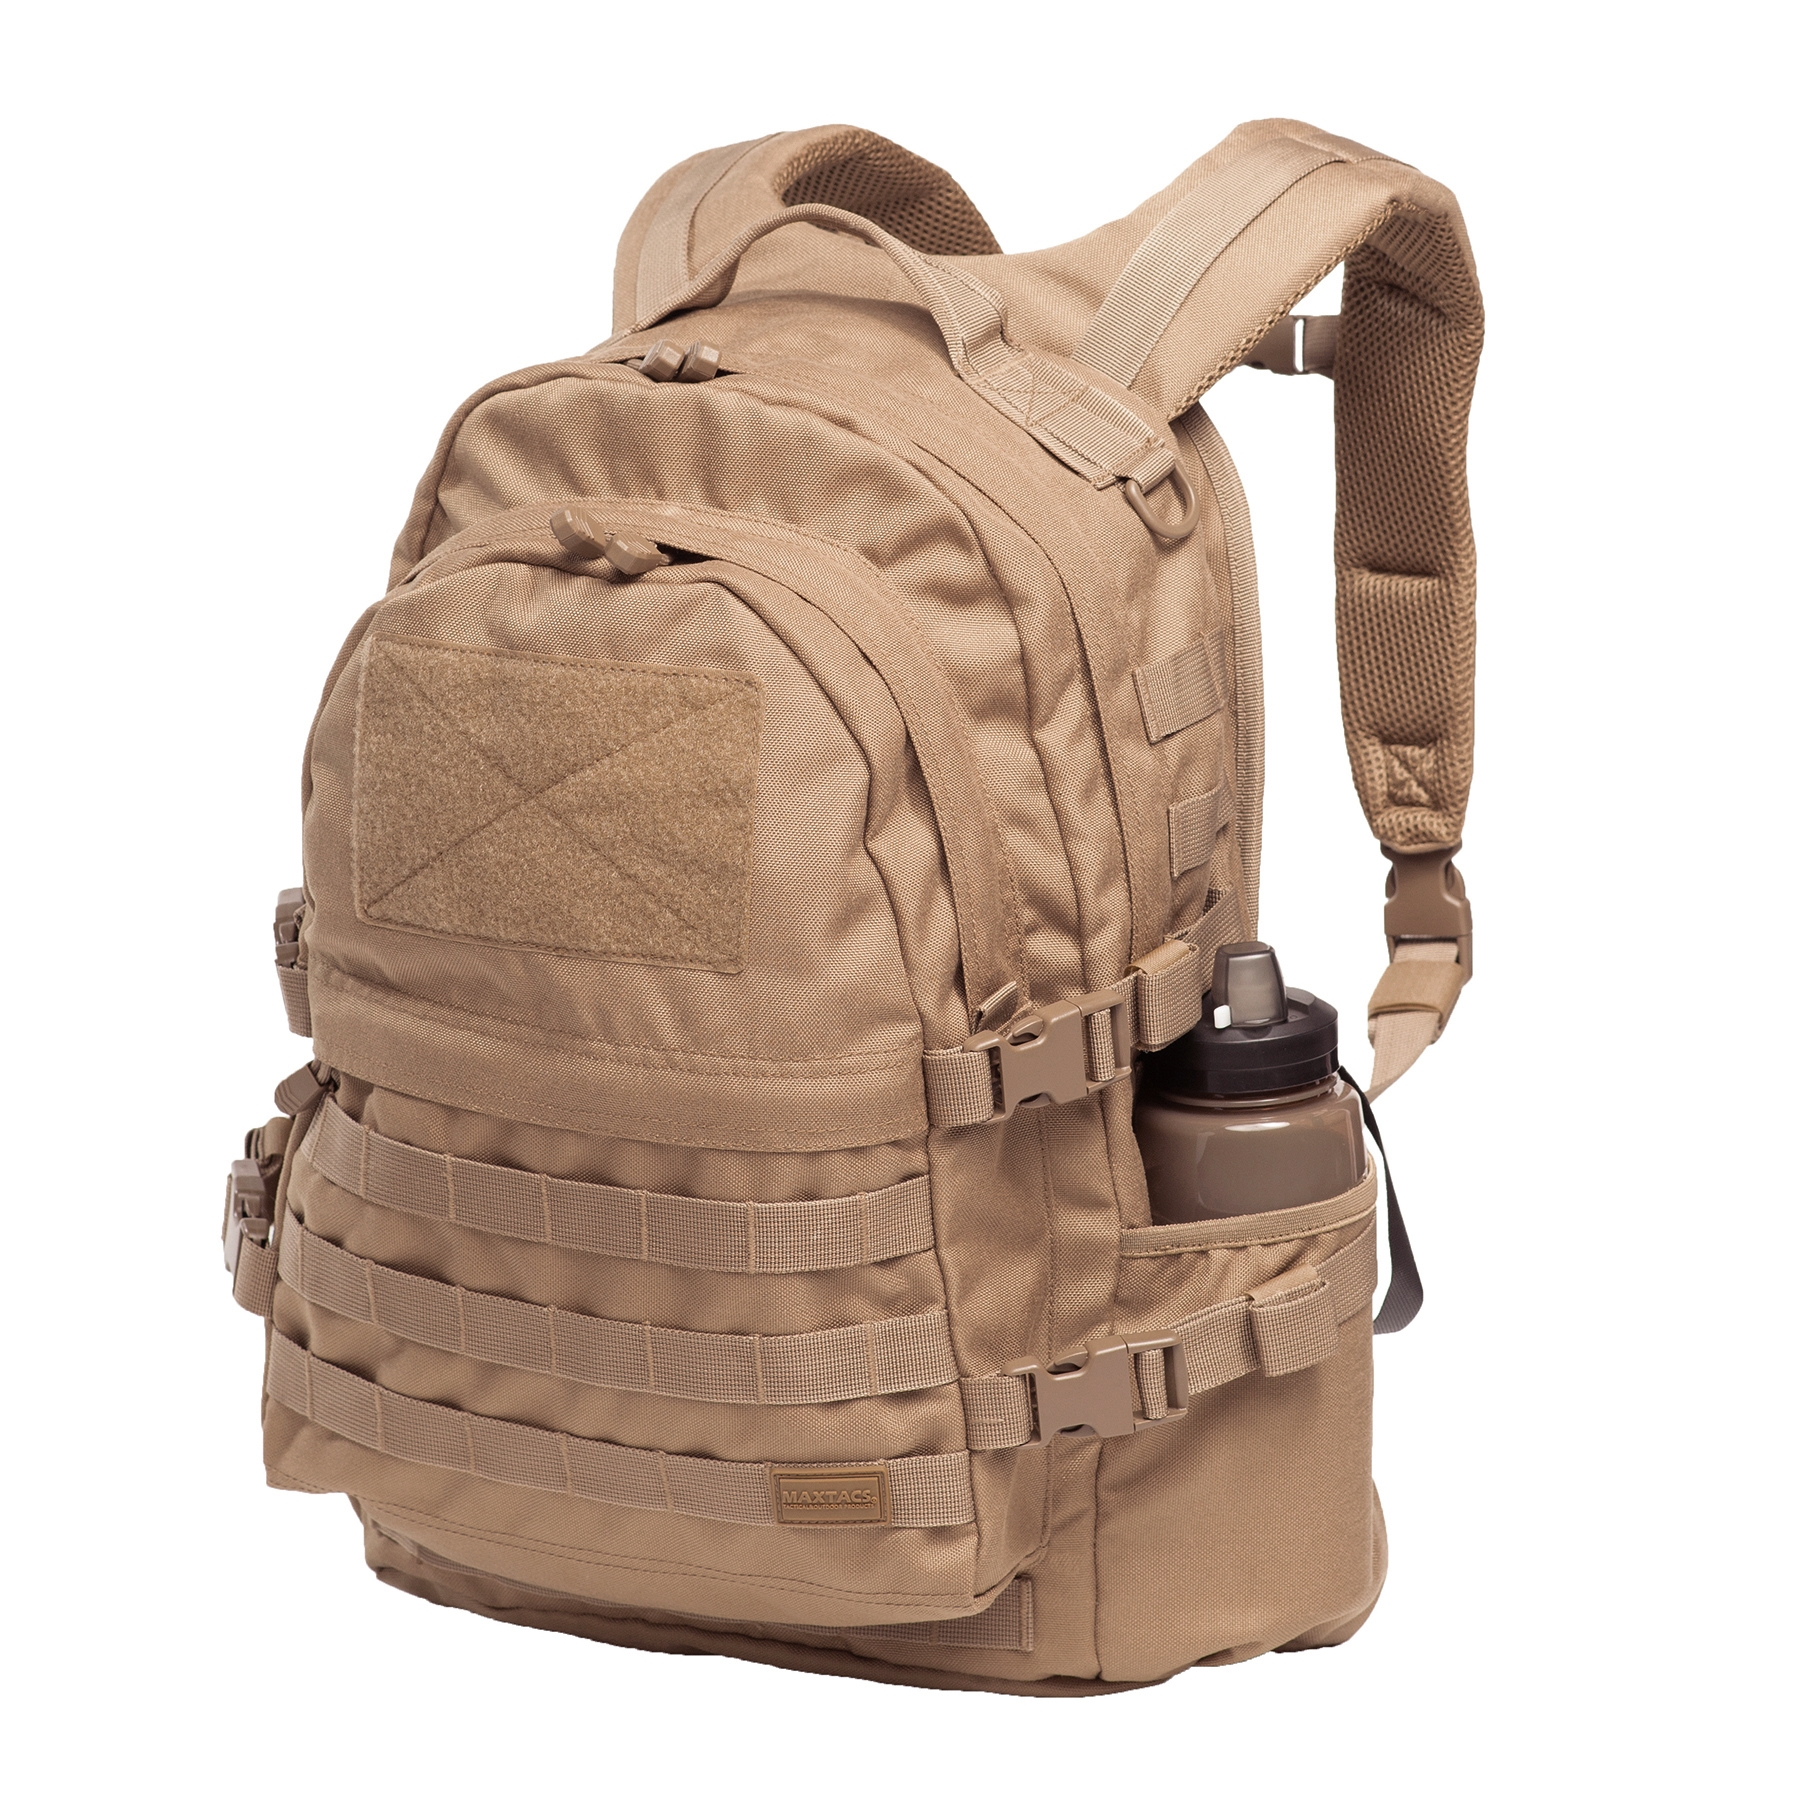 Classic 72 Hrs Backpack-7833